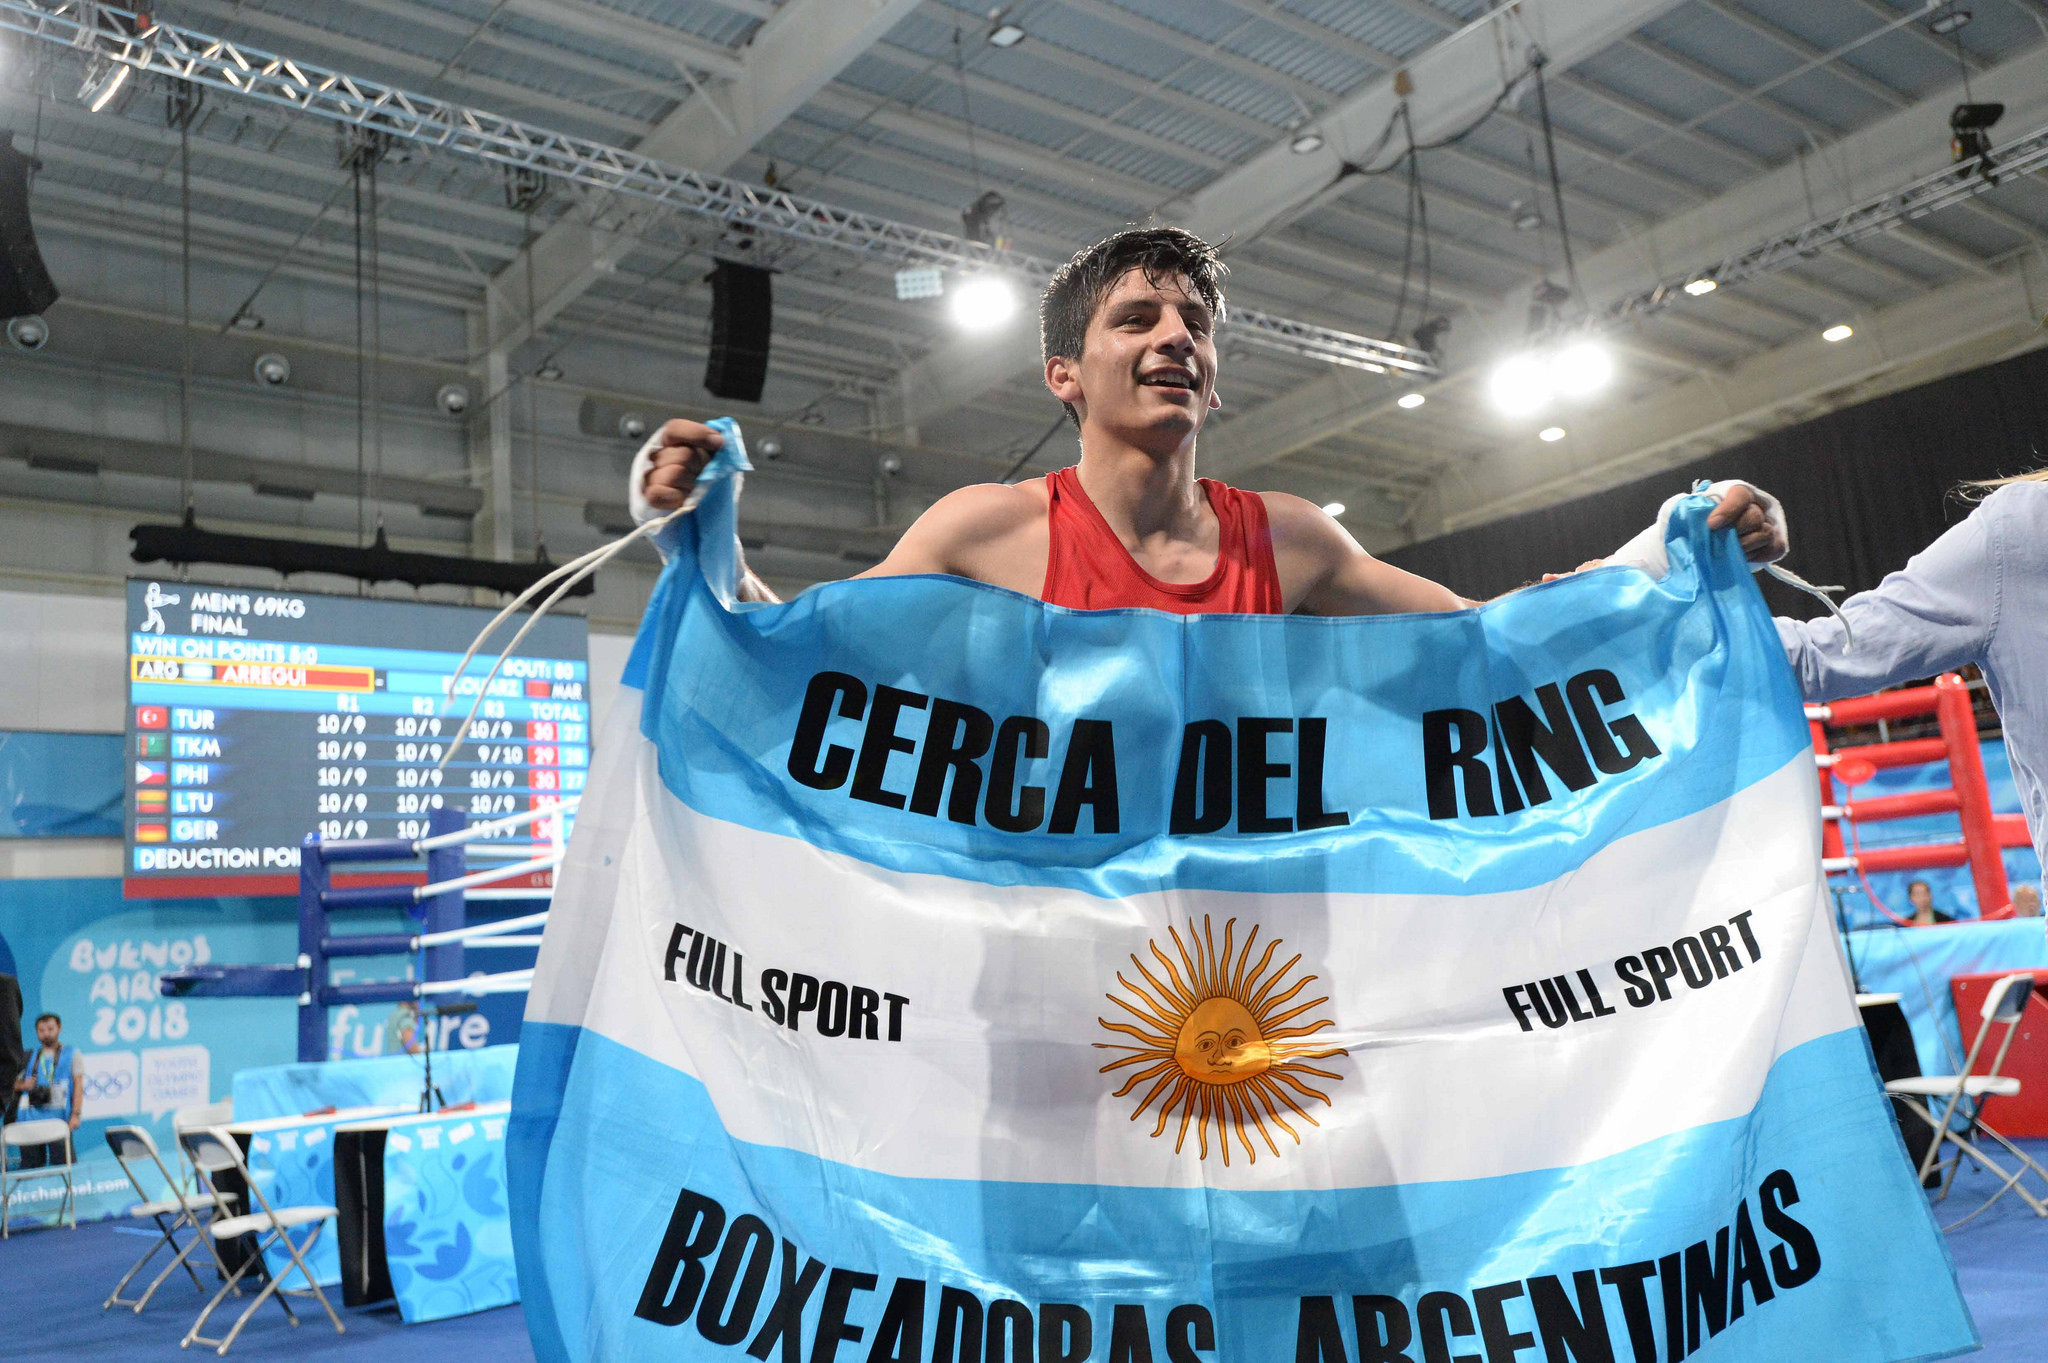 Brian Agustin Arregui clinched boxing gold for Argentina ©Buenos Aires 2018